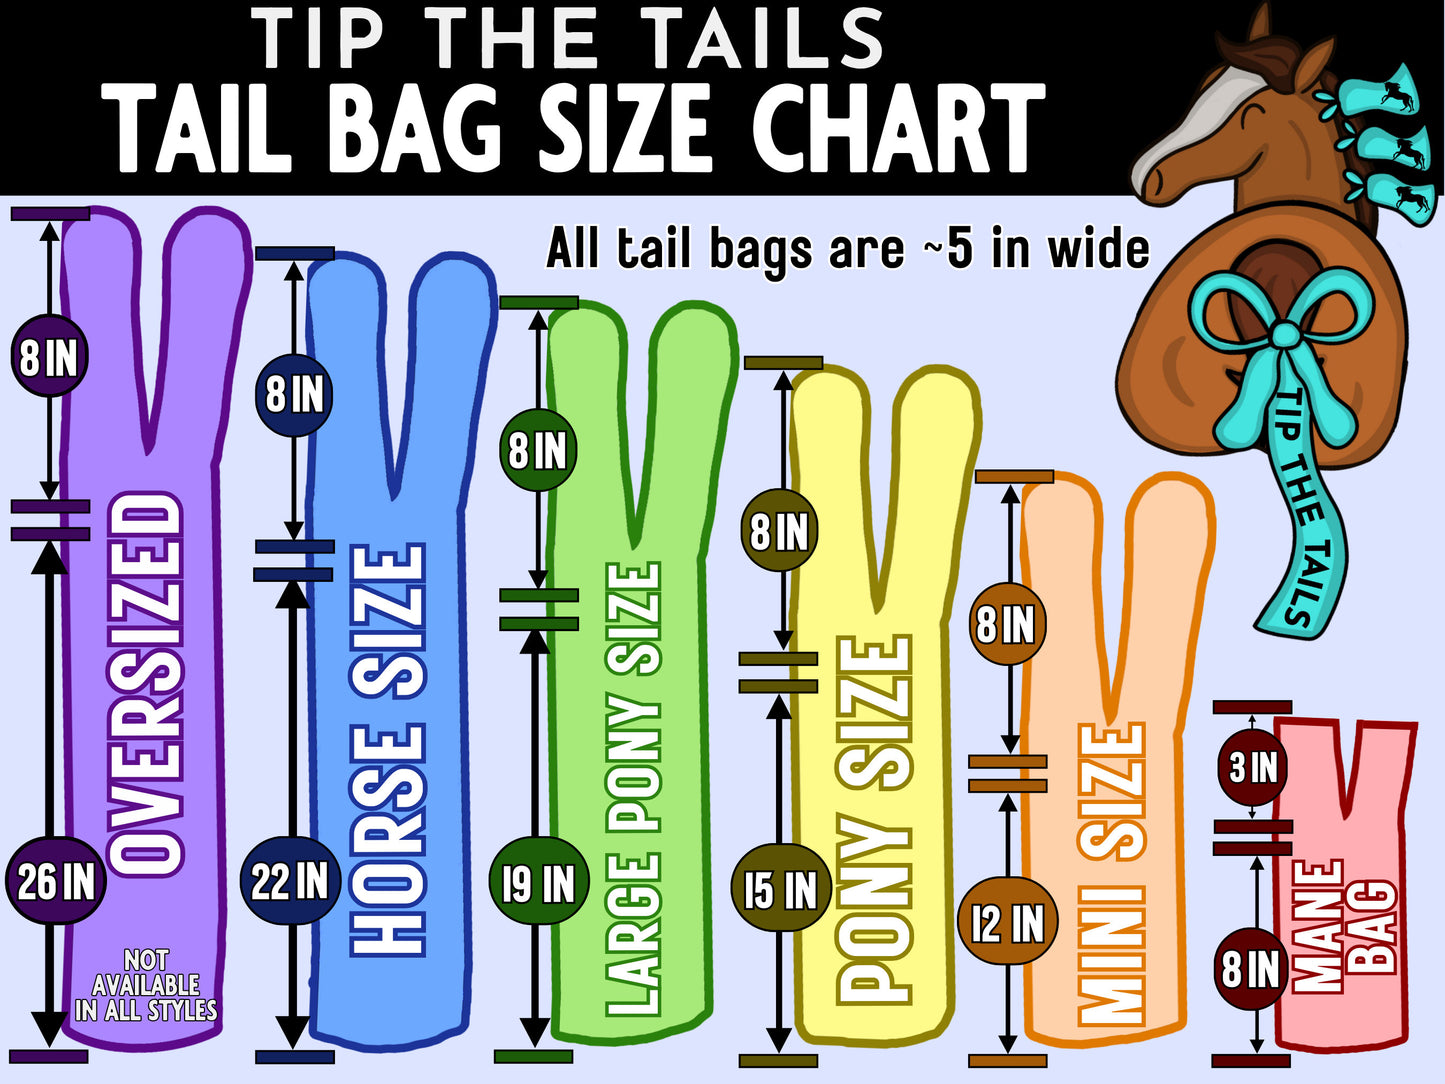 Mare Stare Equine Tail Bag-Tip The Tails